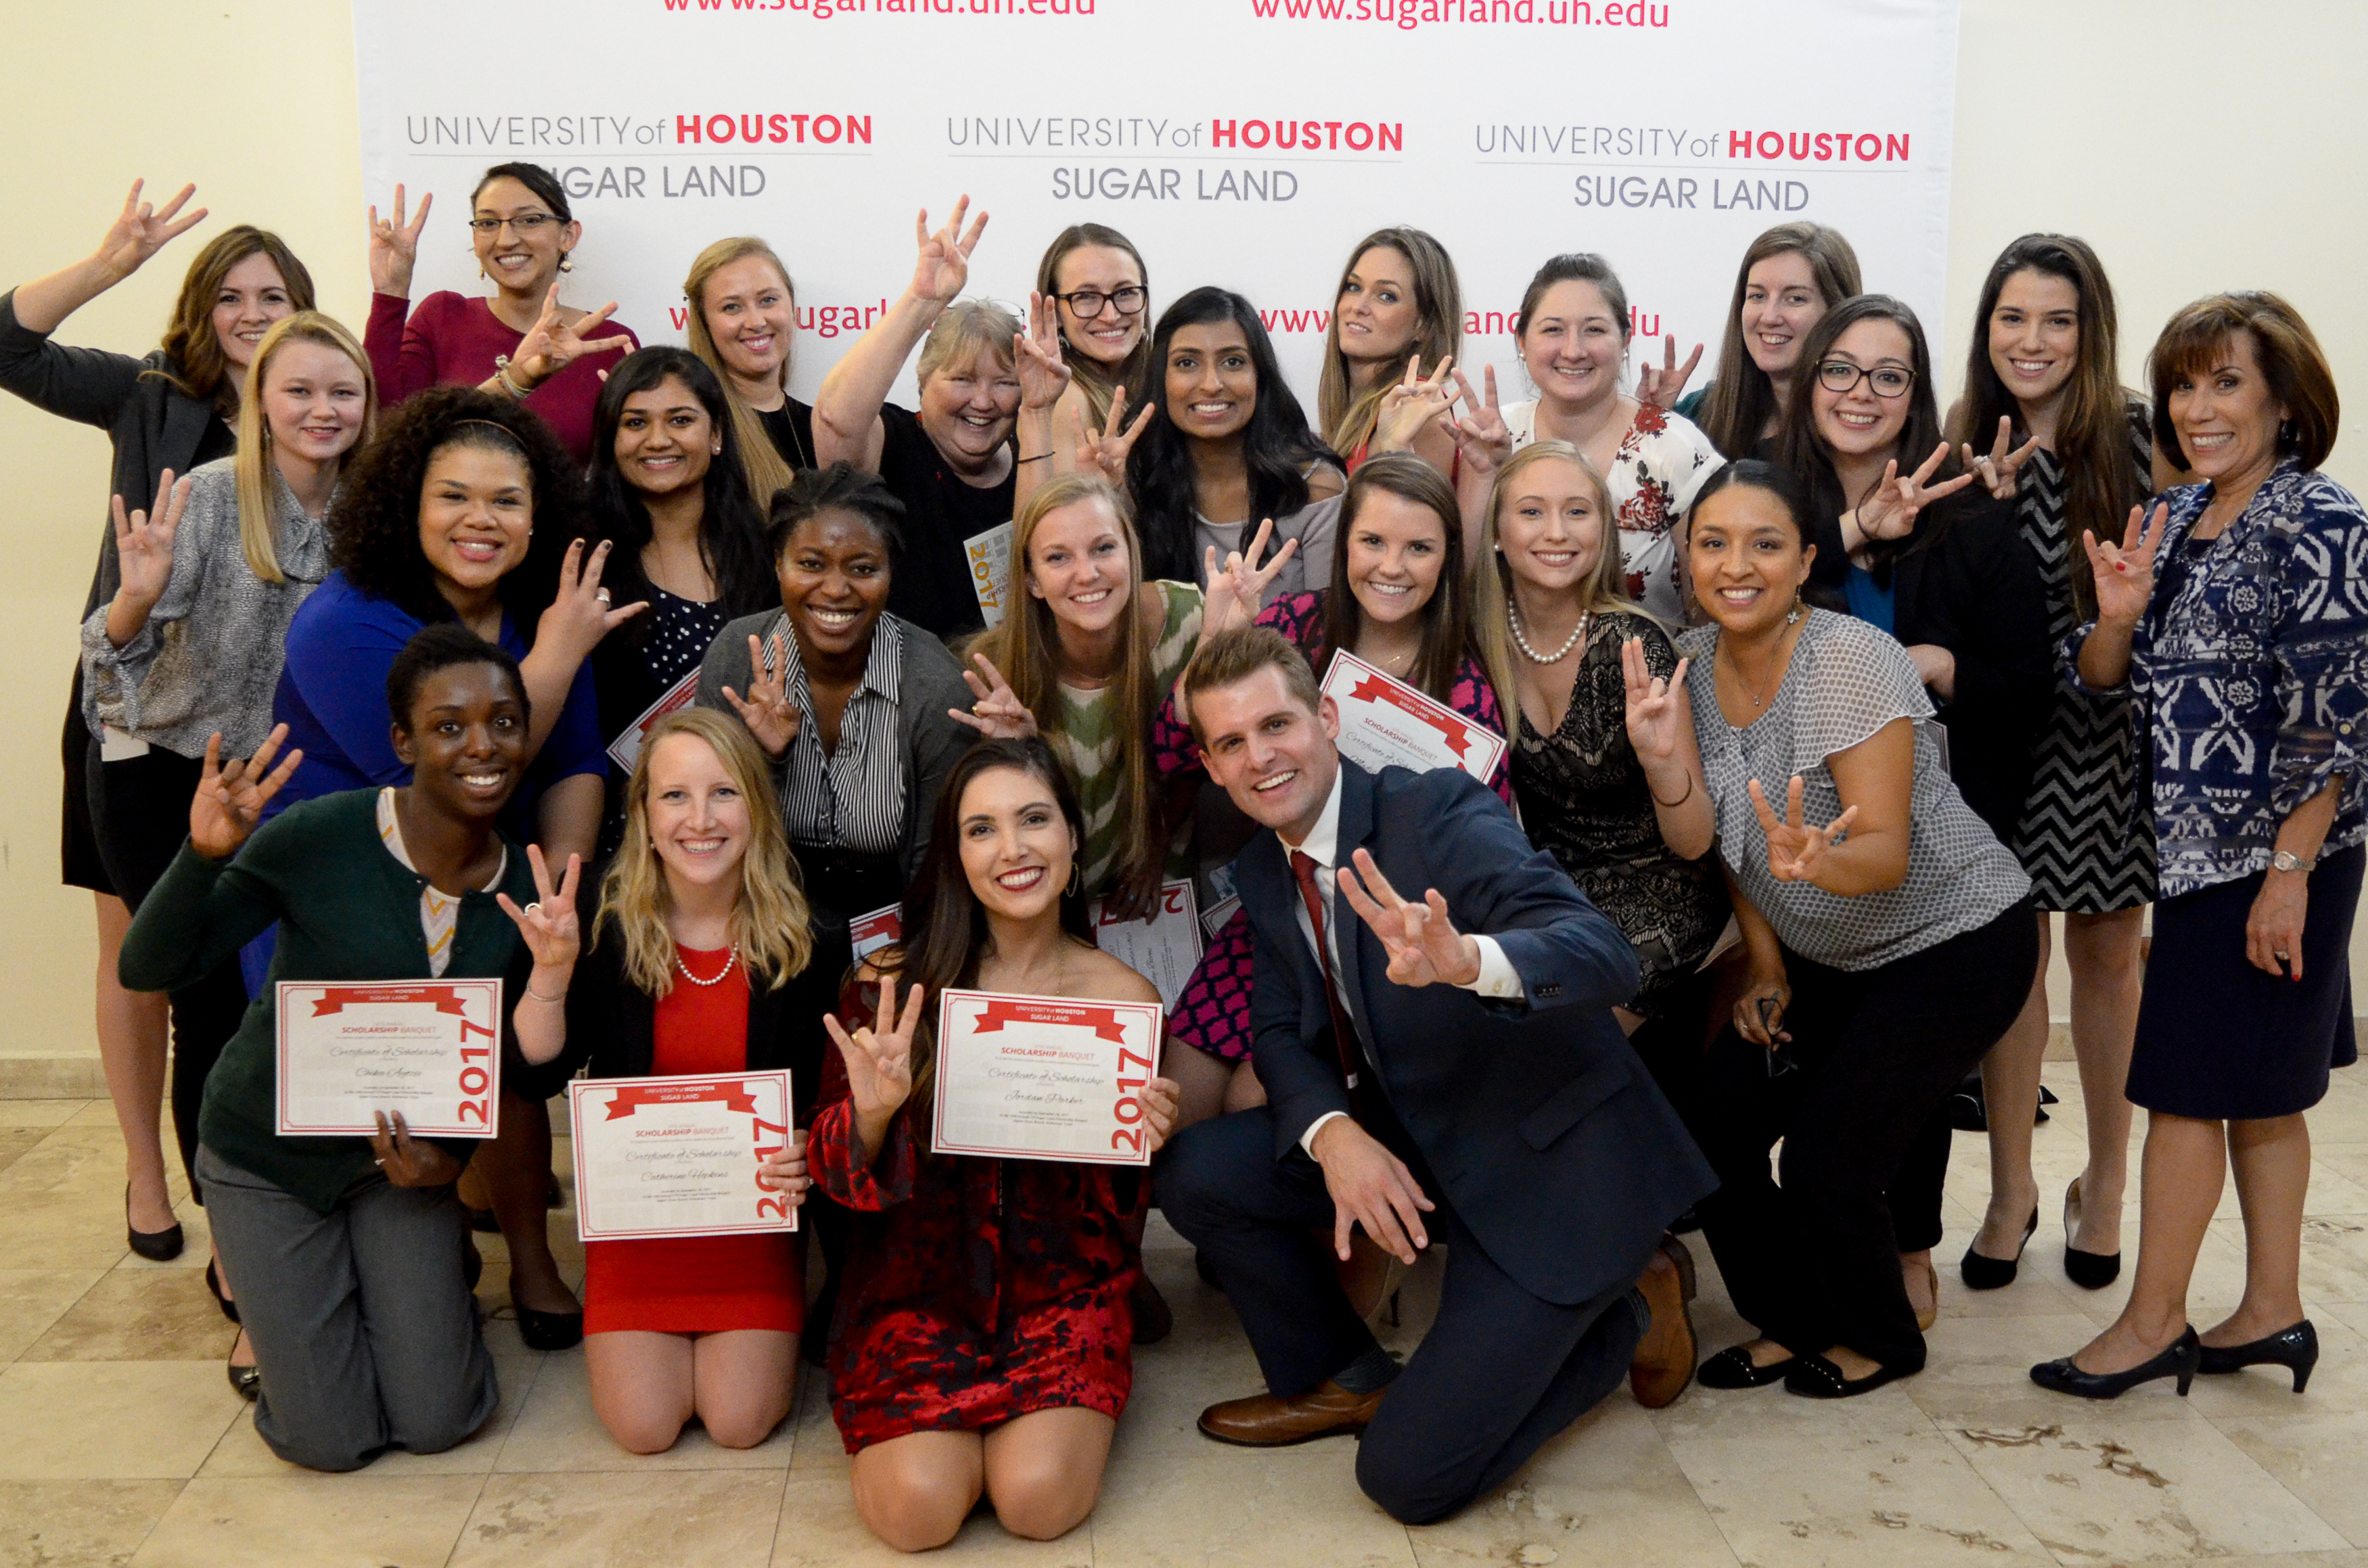 Group of students making Go coogs handsign